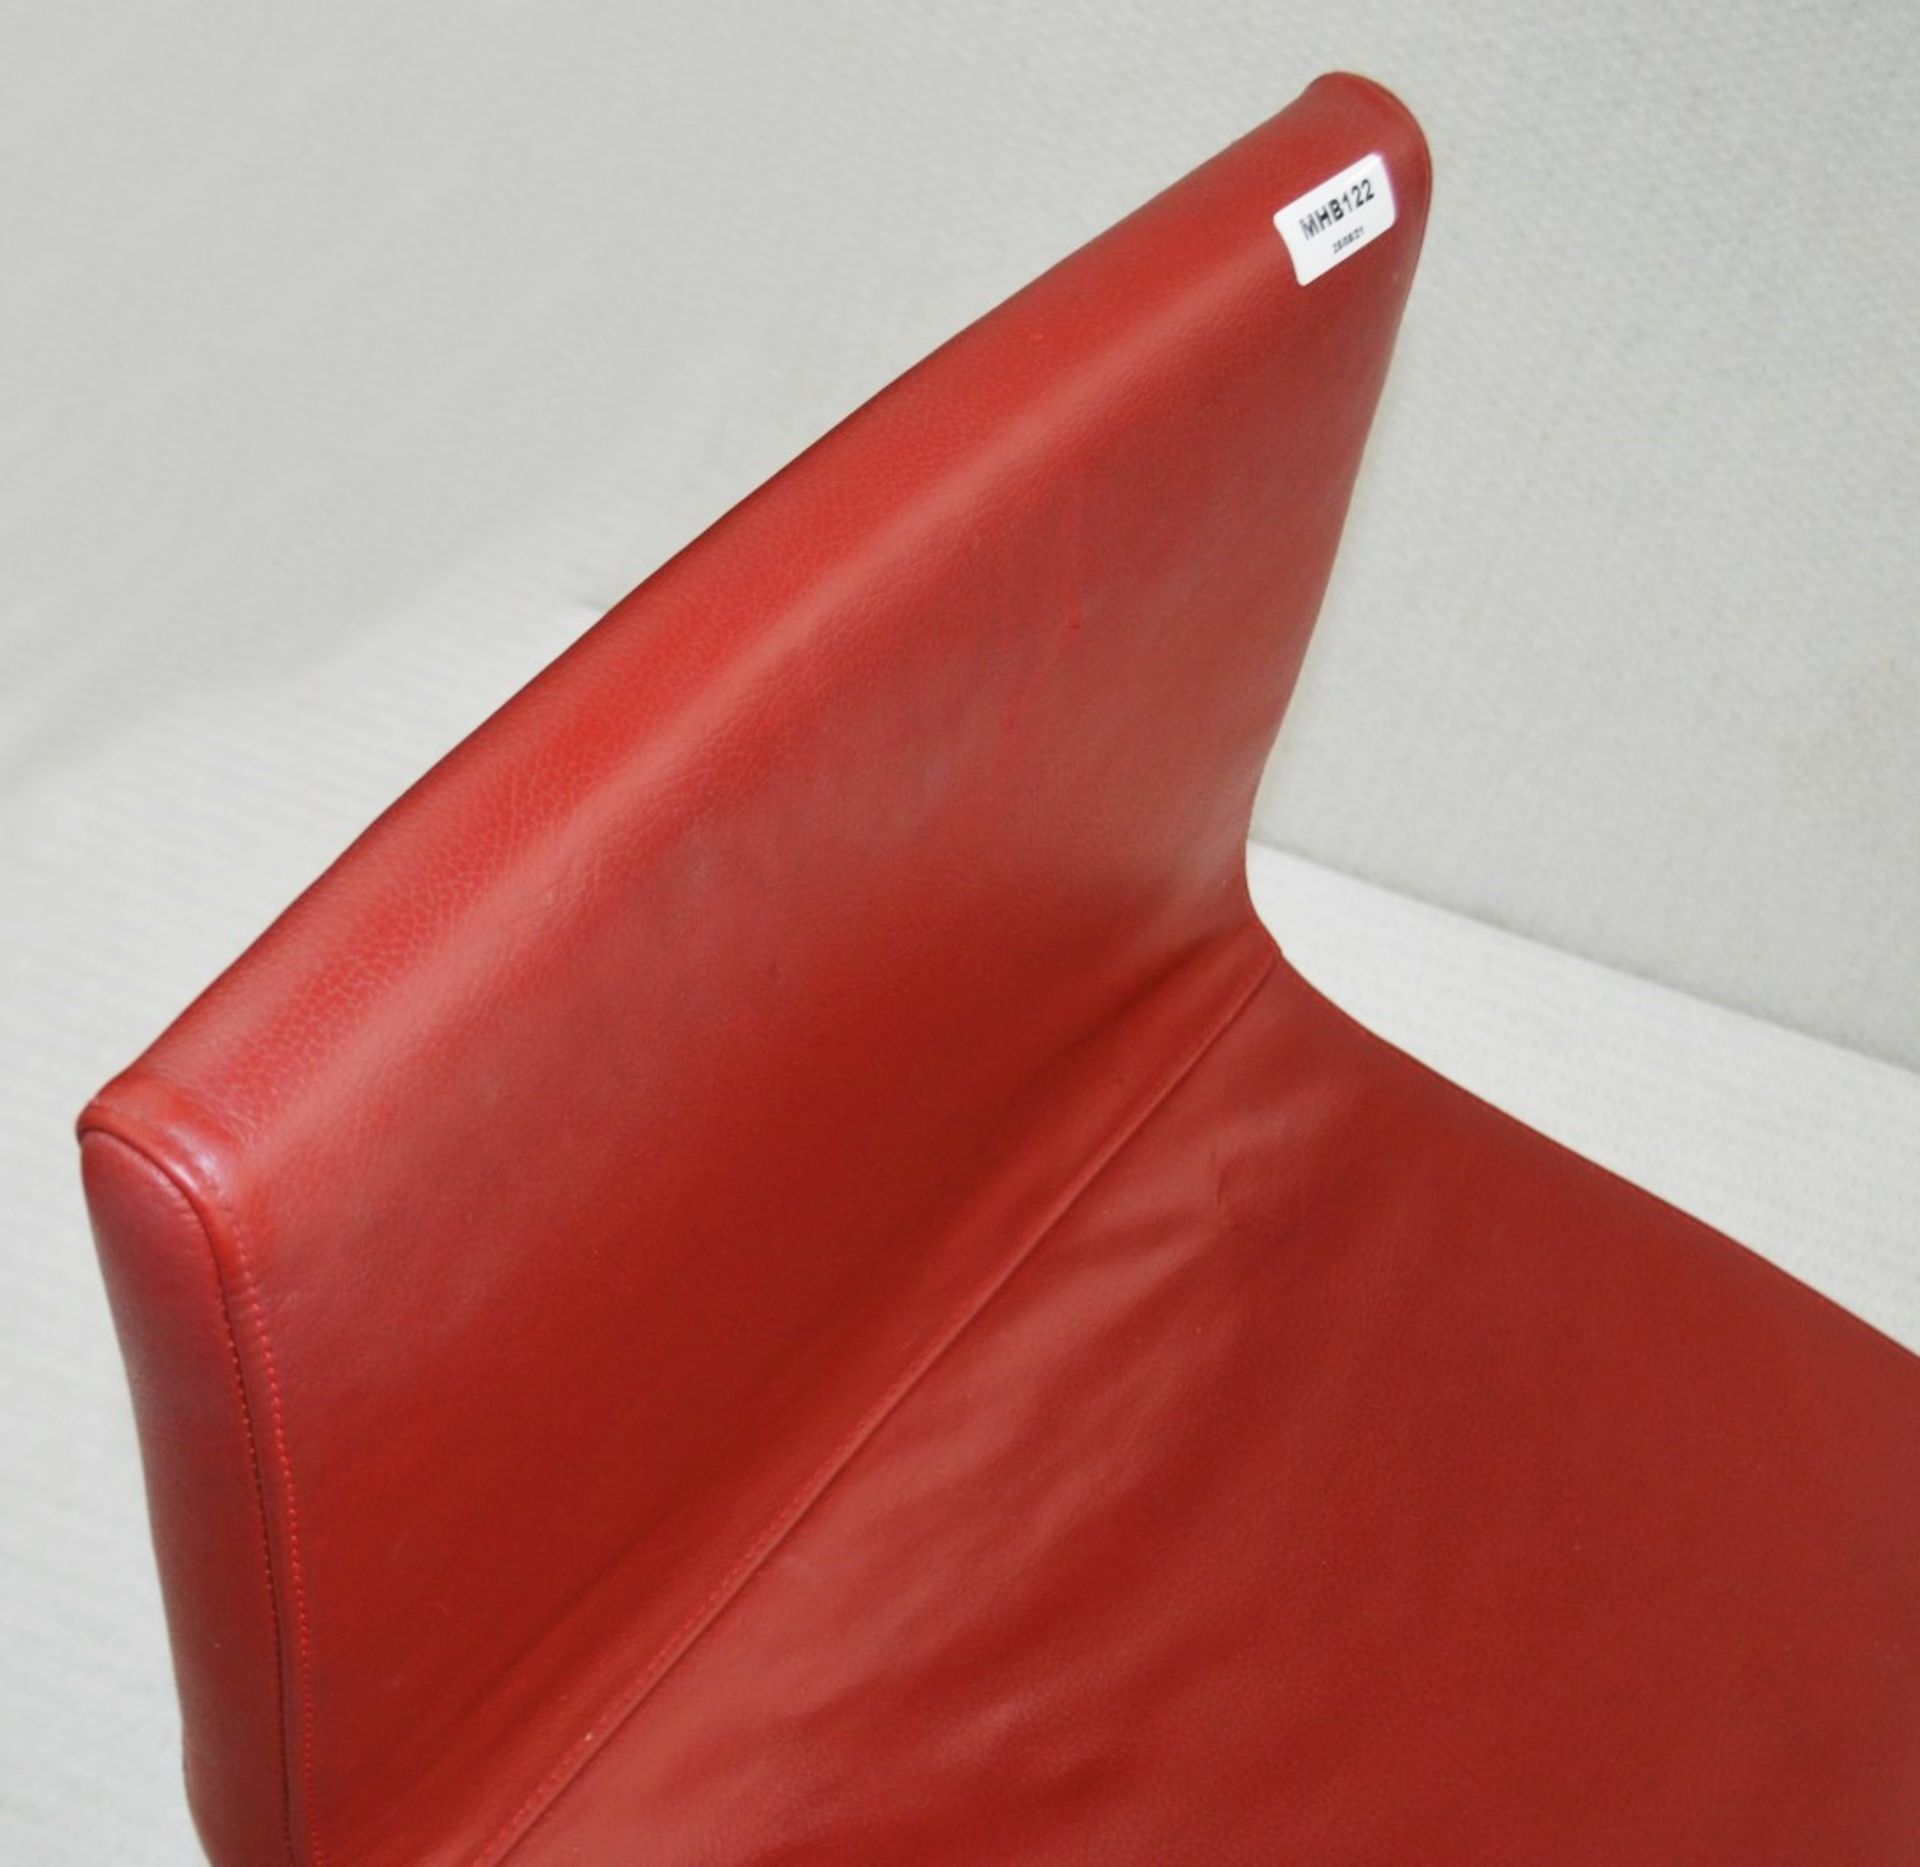 4 x Stylish Contemporary Chairs Upholstered In Red Faux Leather With Chrome Bases - Dimensions: - Image 3 of 6